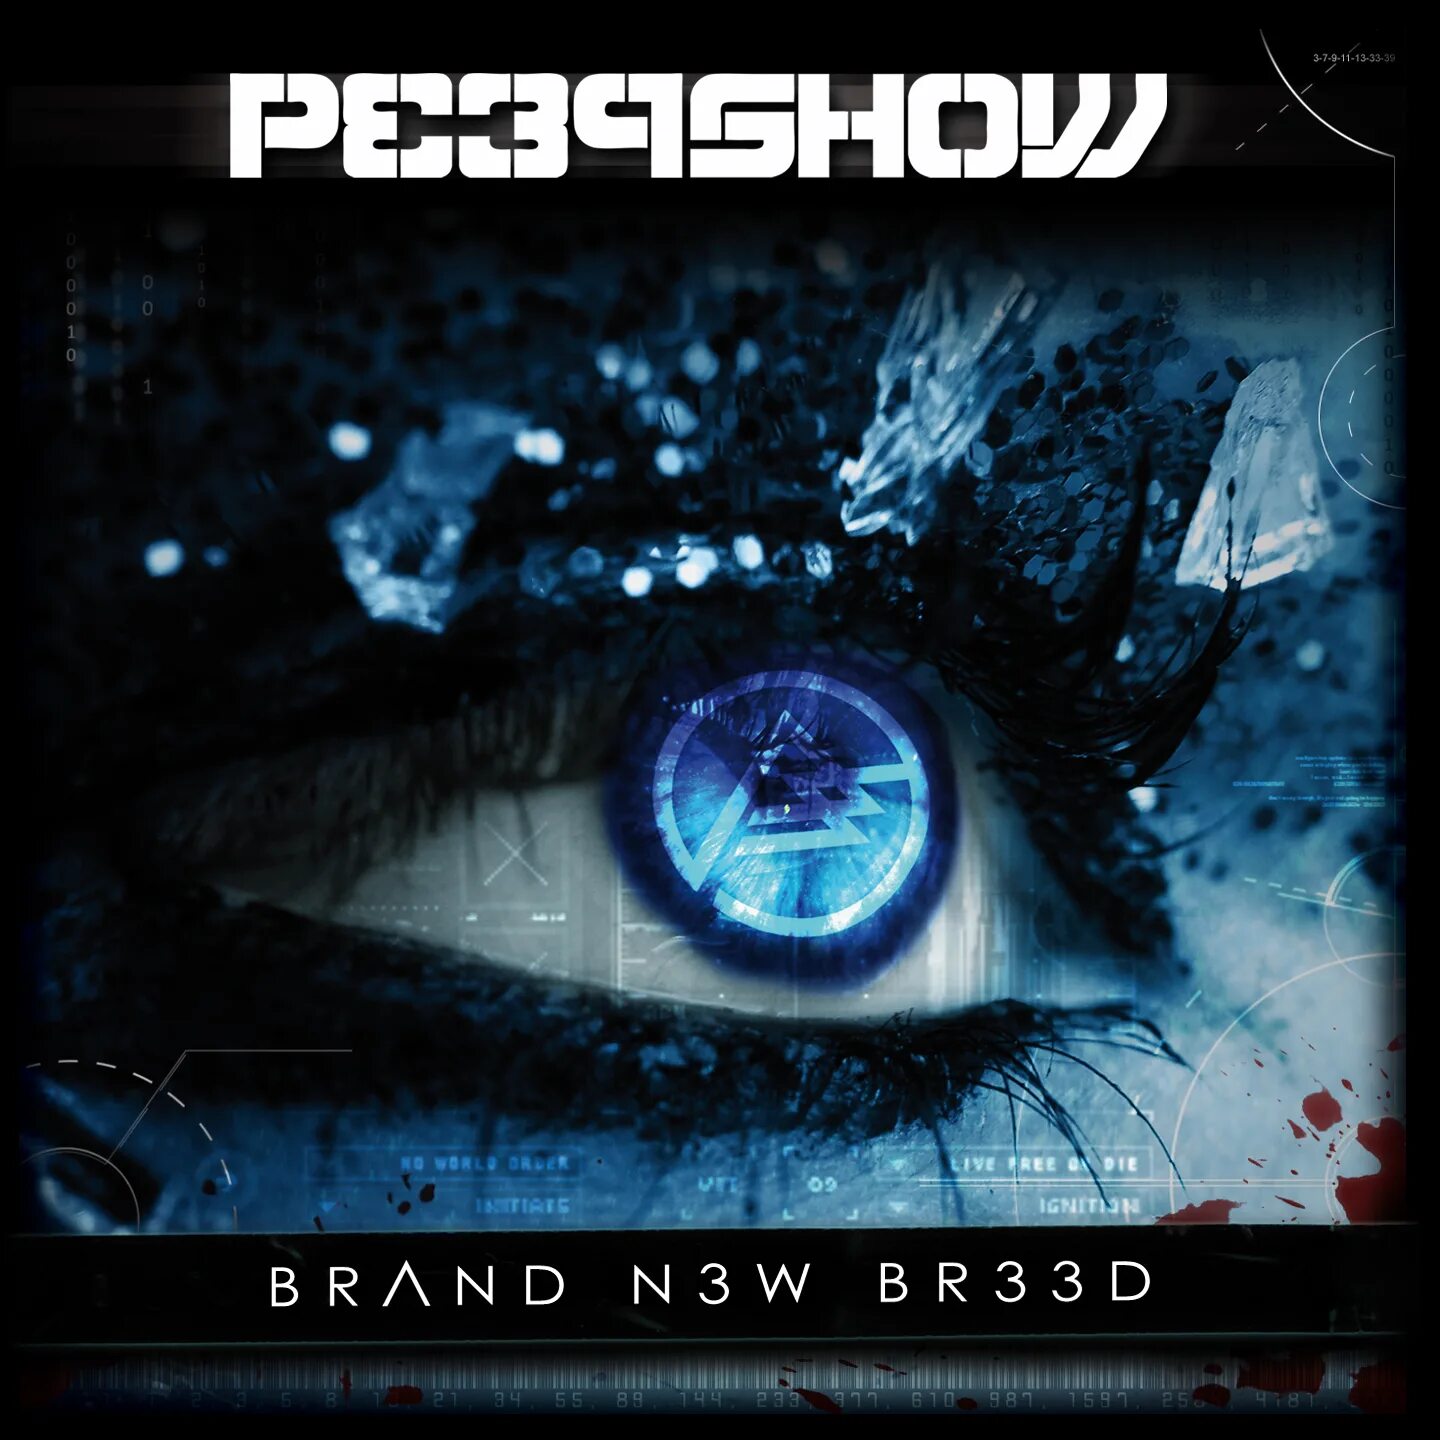 Breed new generation. Brand New. Show brand. The Peep show Cover. Star Eyes.